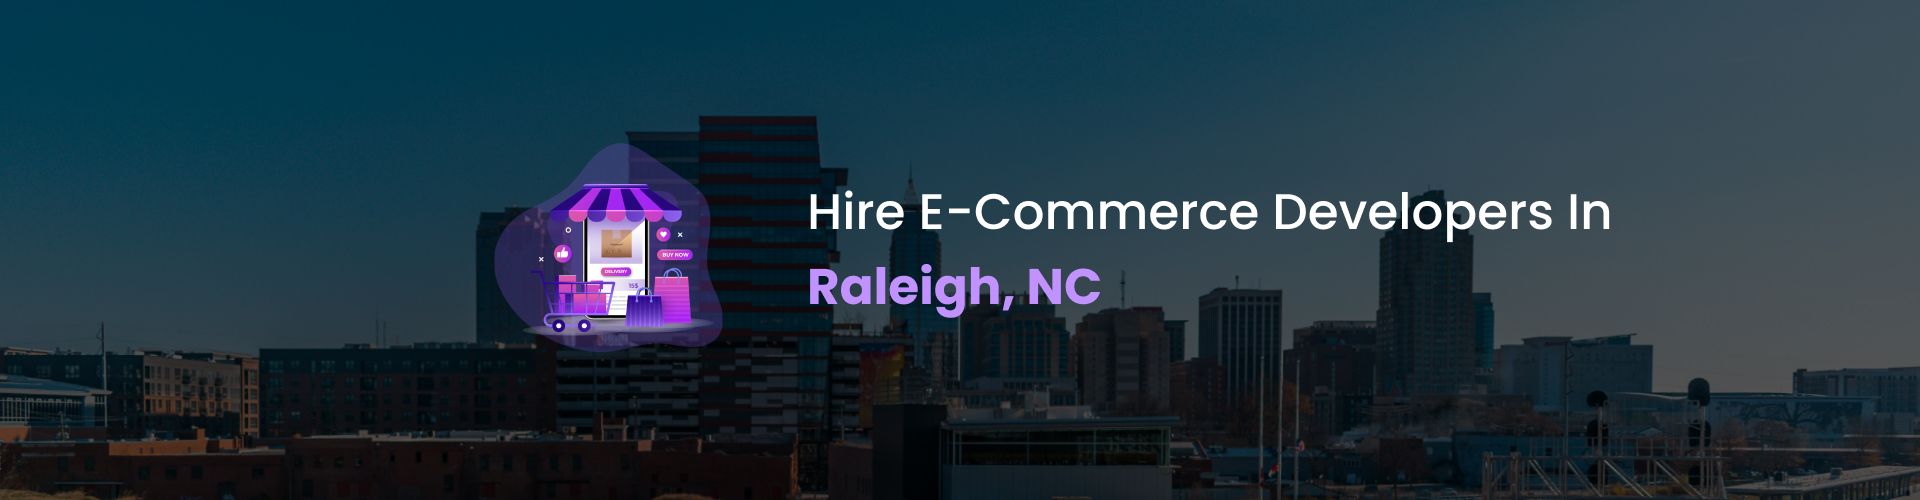 ecommerce development company in raleigh